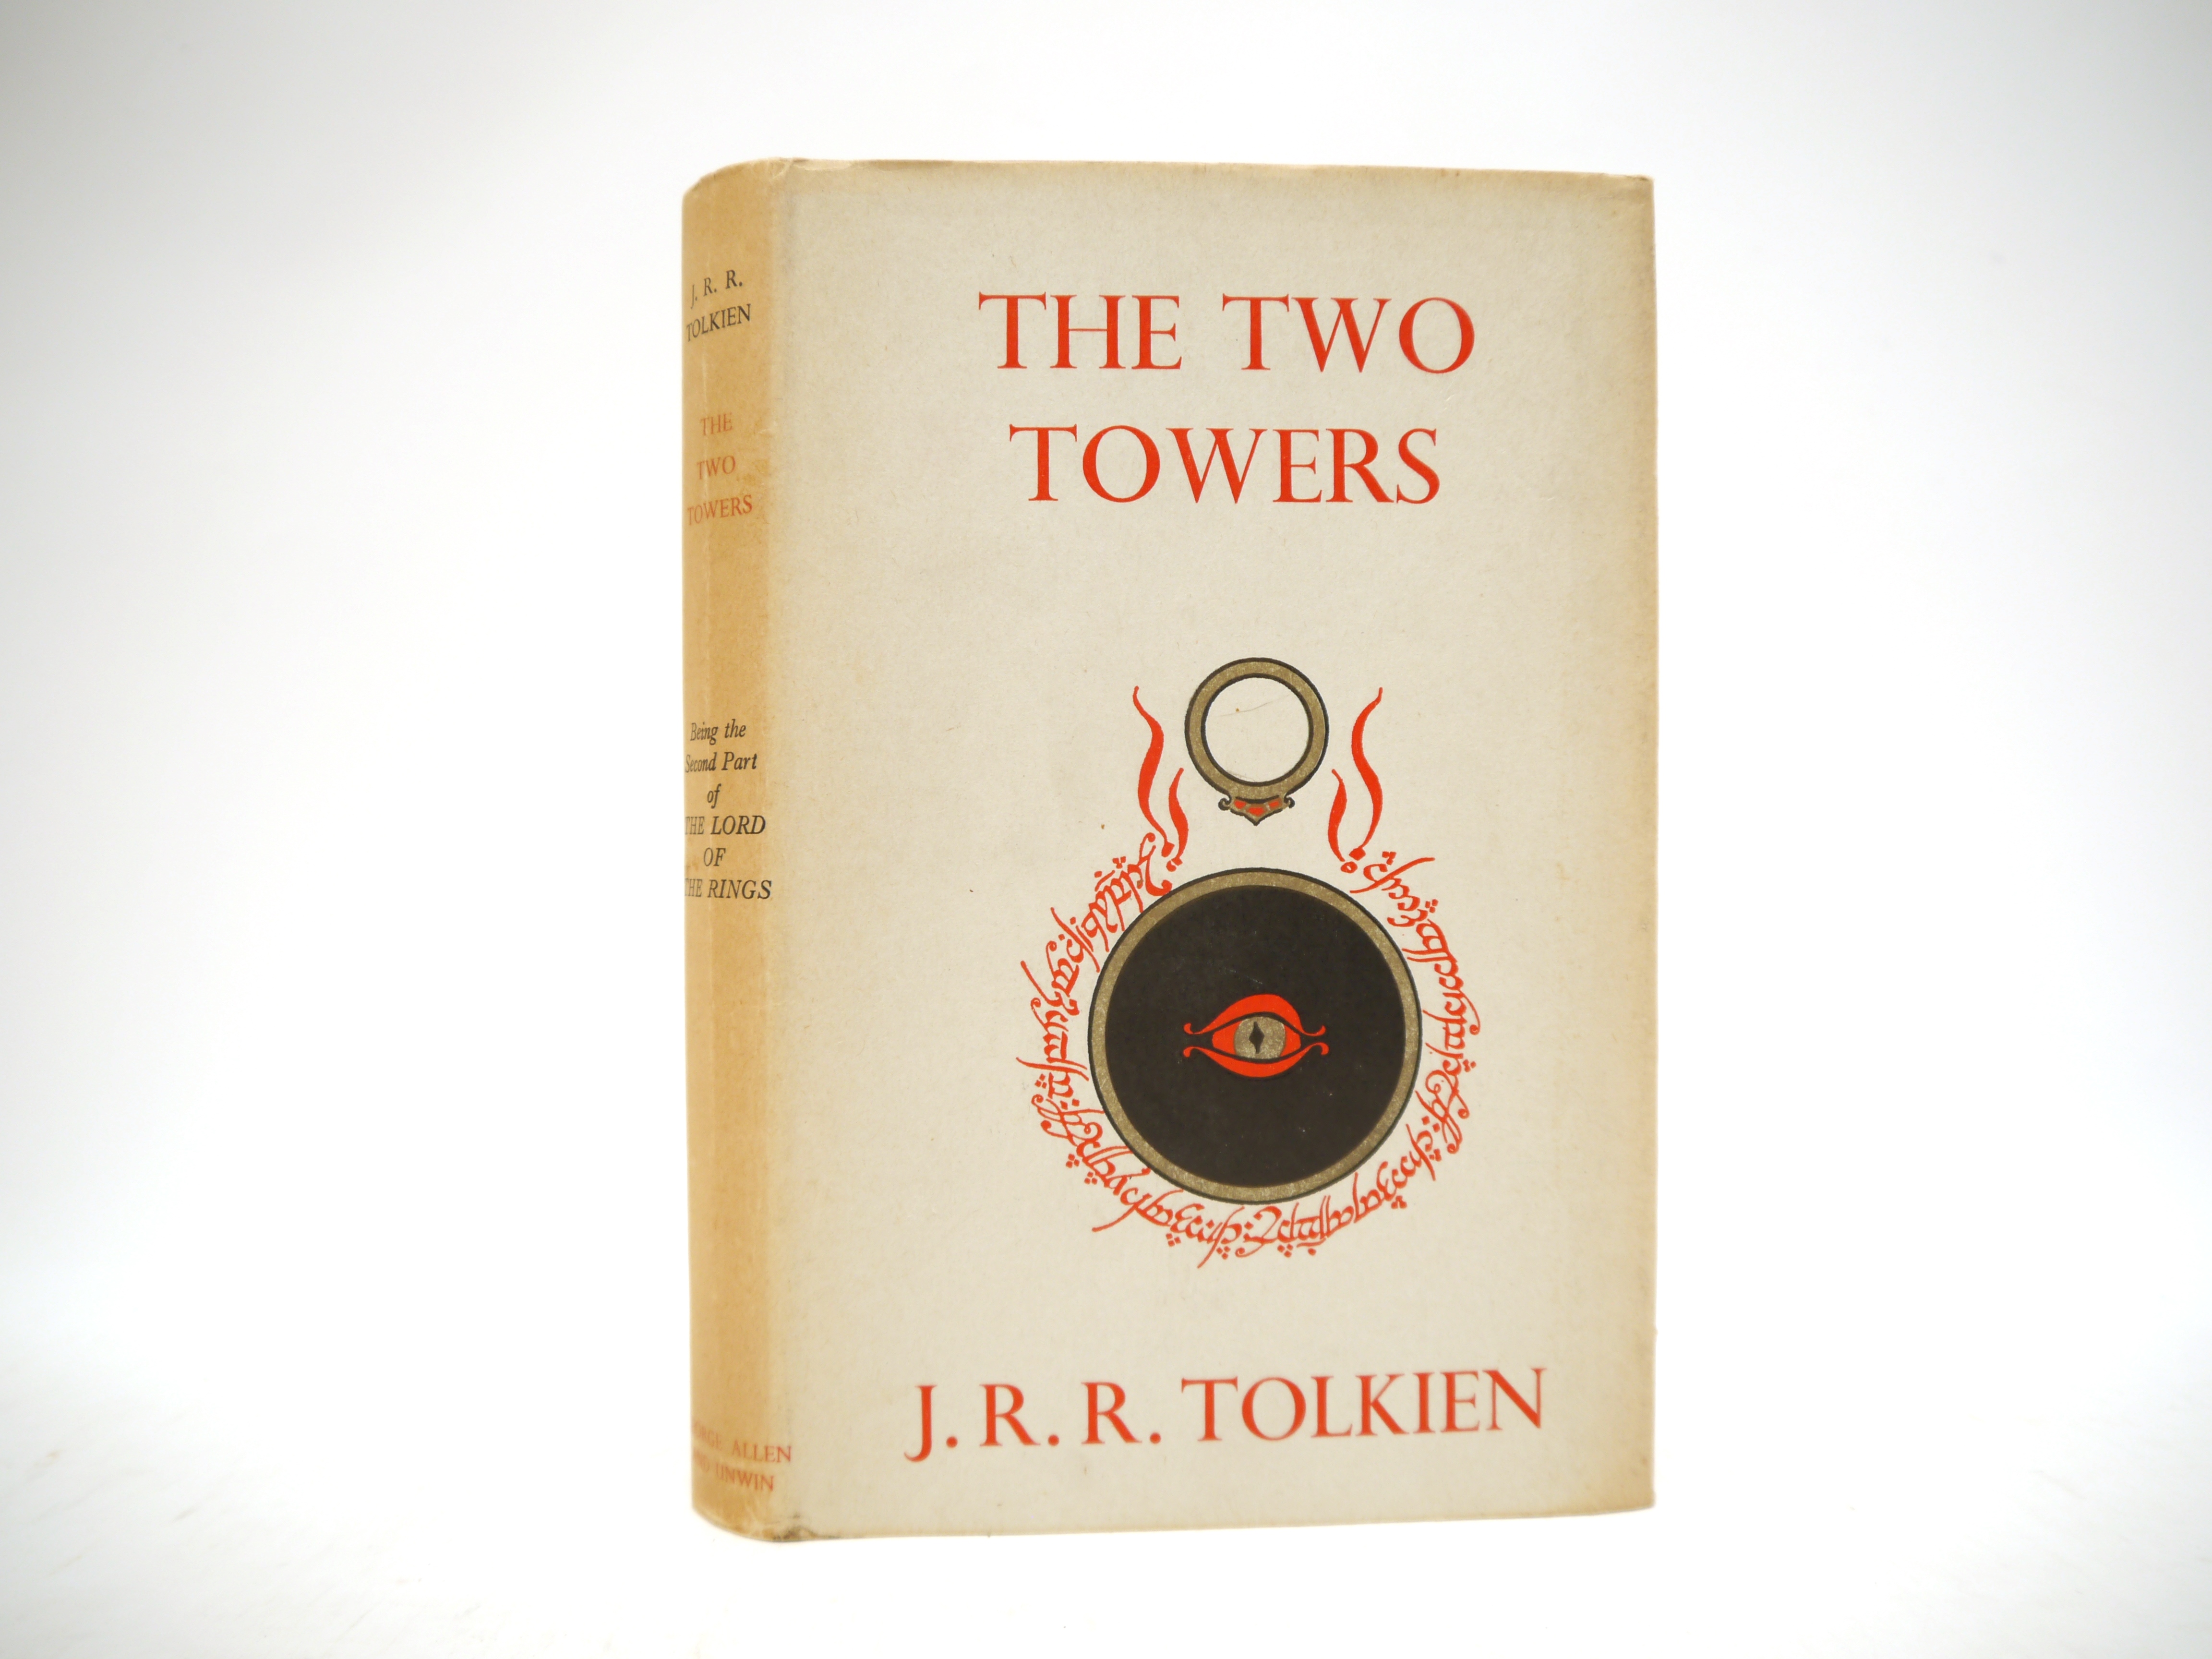 J.R.R. Tolkien: 'The Two Towers. Being the Second Part of The Lord of the Rings', London, George